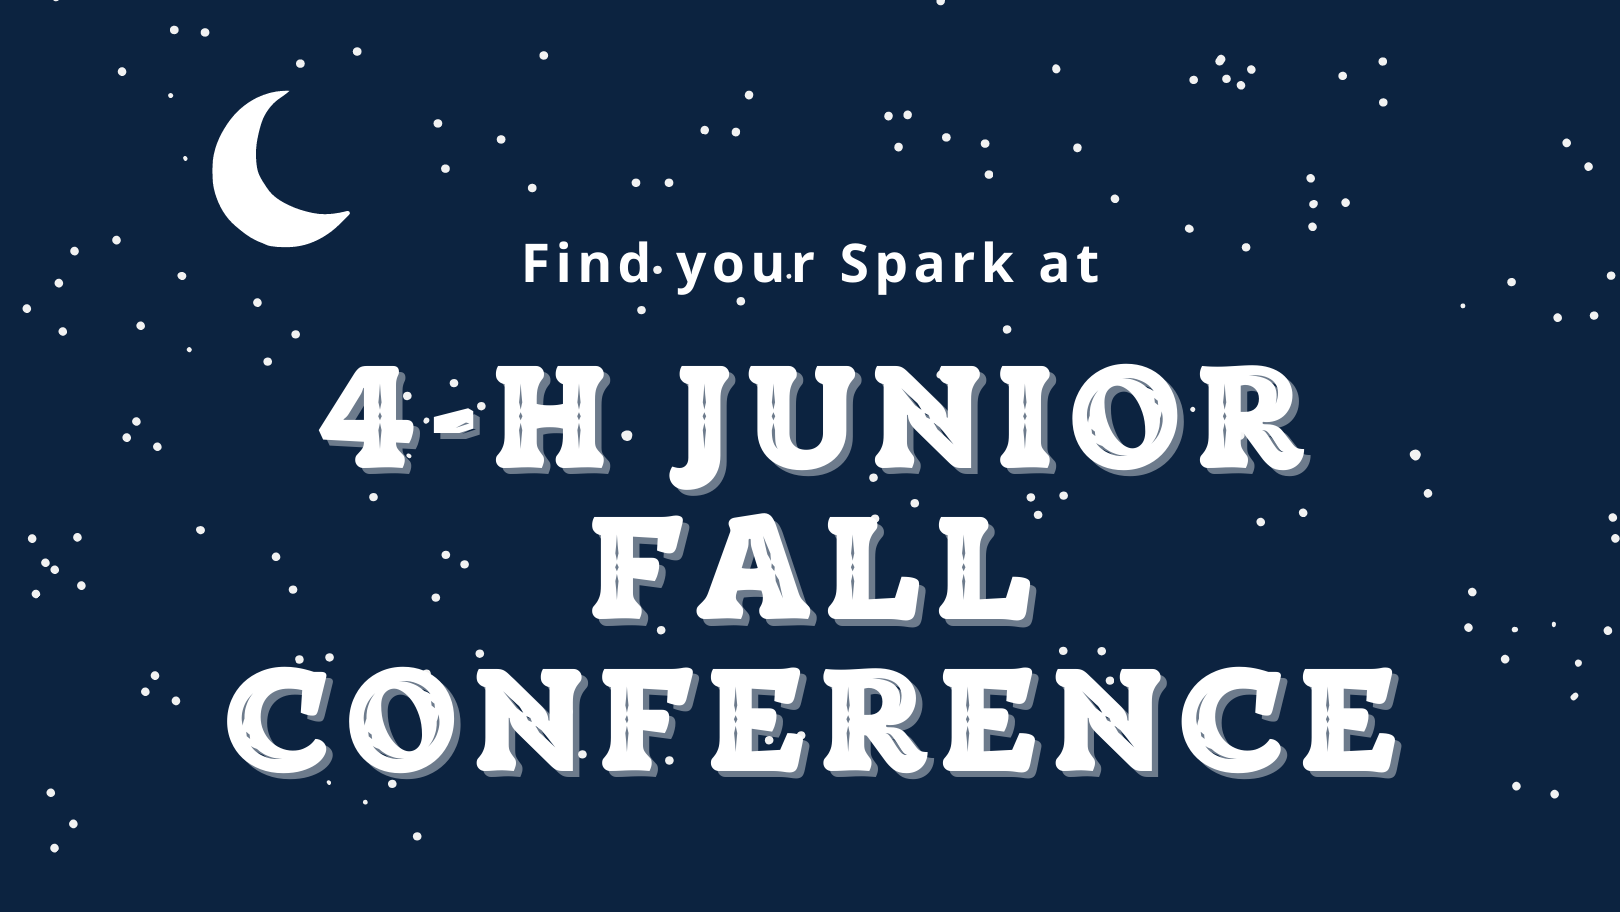 graphic that says Find your spark at 4-H Junior Fall Conference in white letters on a dark starry background